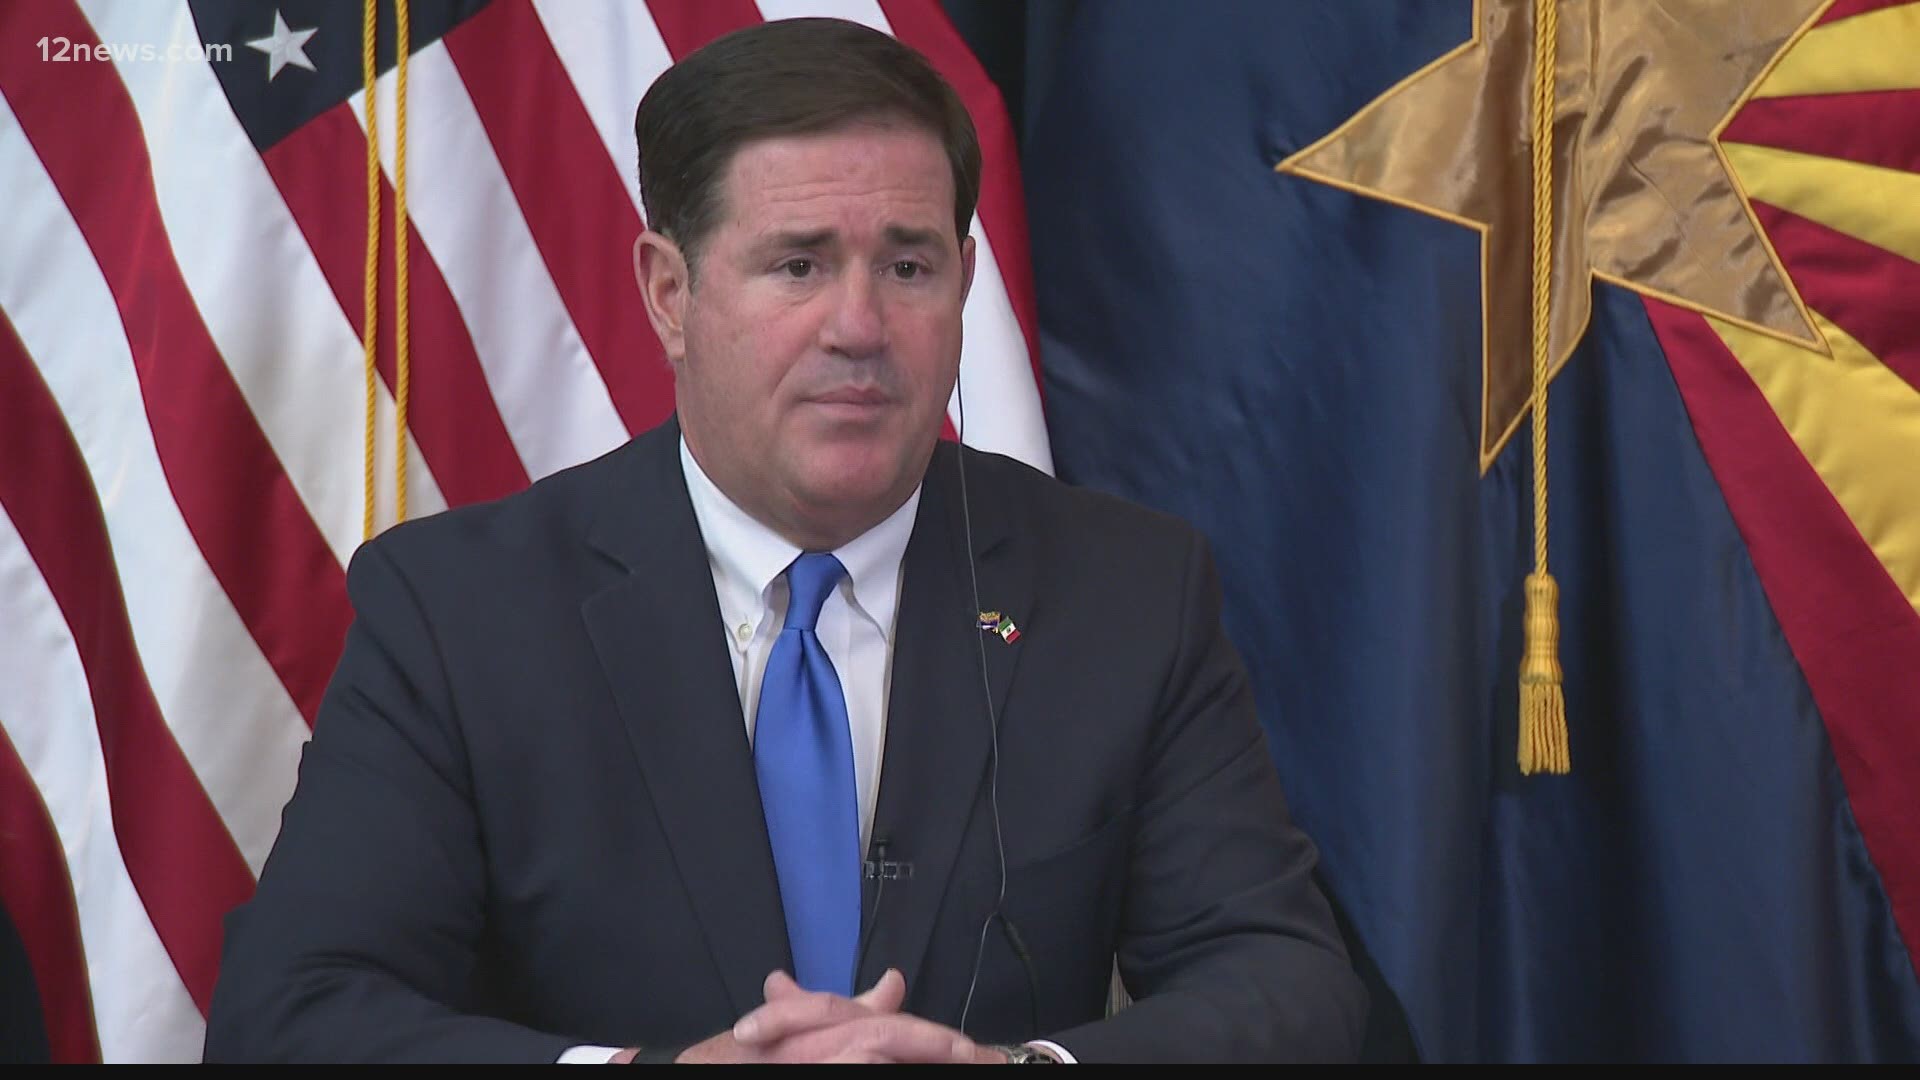 Governor Doug Ducey has signed a law he says will ban 'Critical Race Theory' teachings in public schools. The law could prompt backlash among educators.